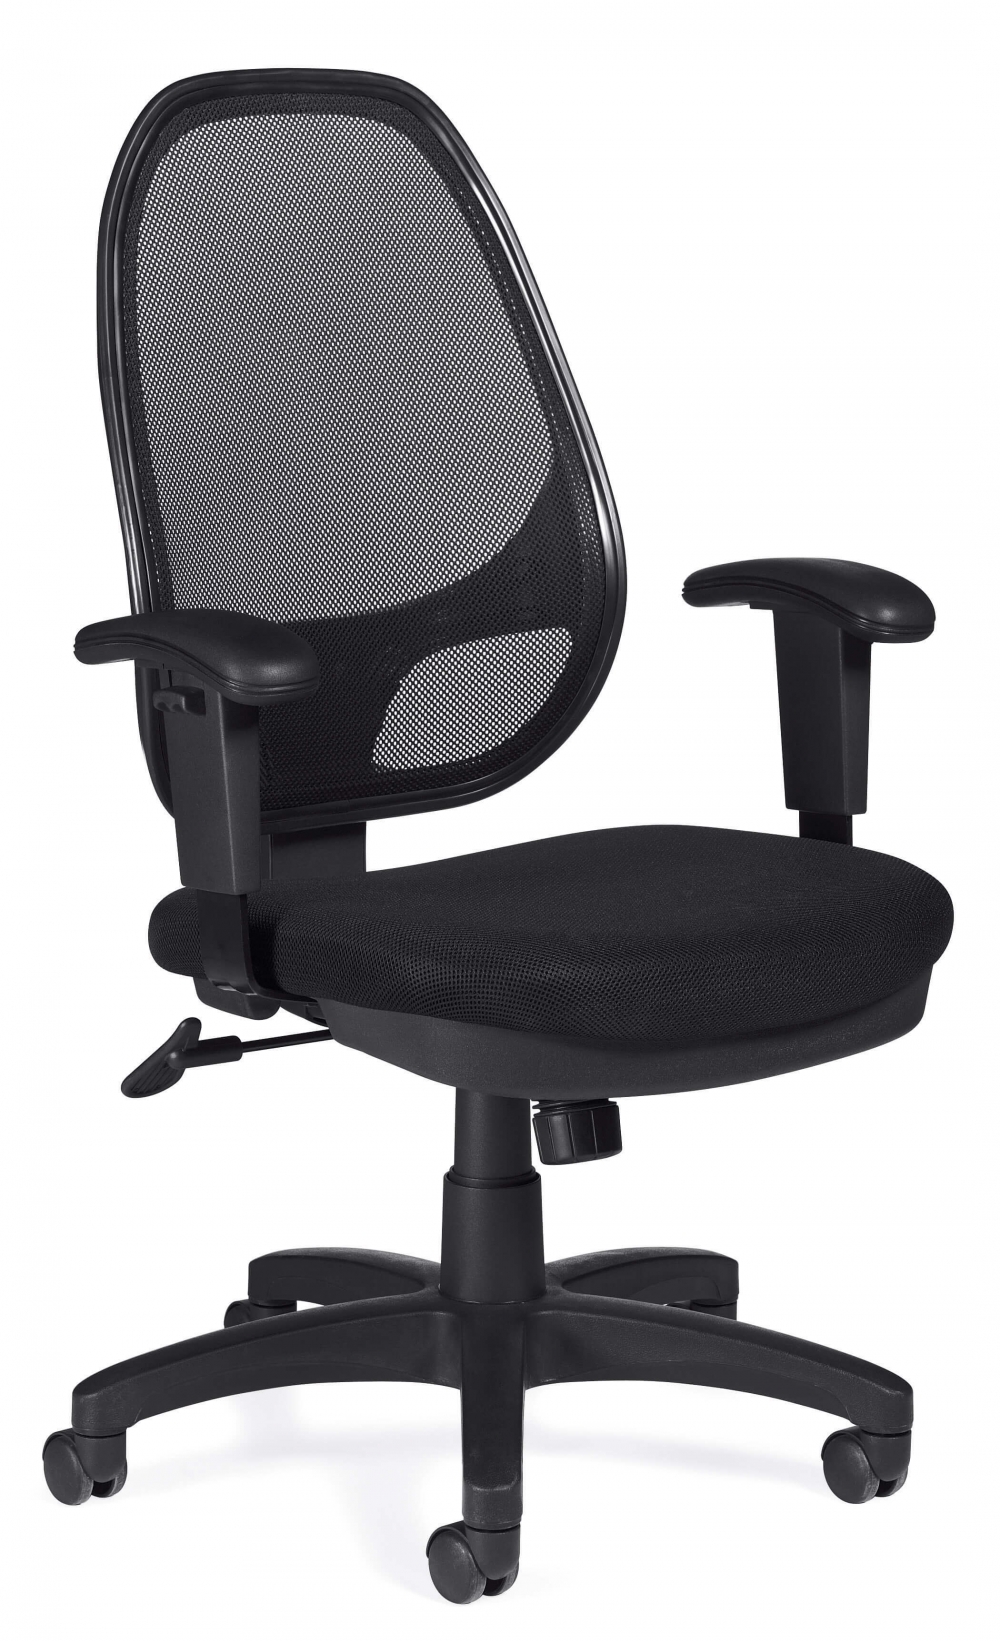 office-furniture-chairs-adjustable-chairs.jpg